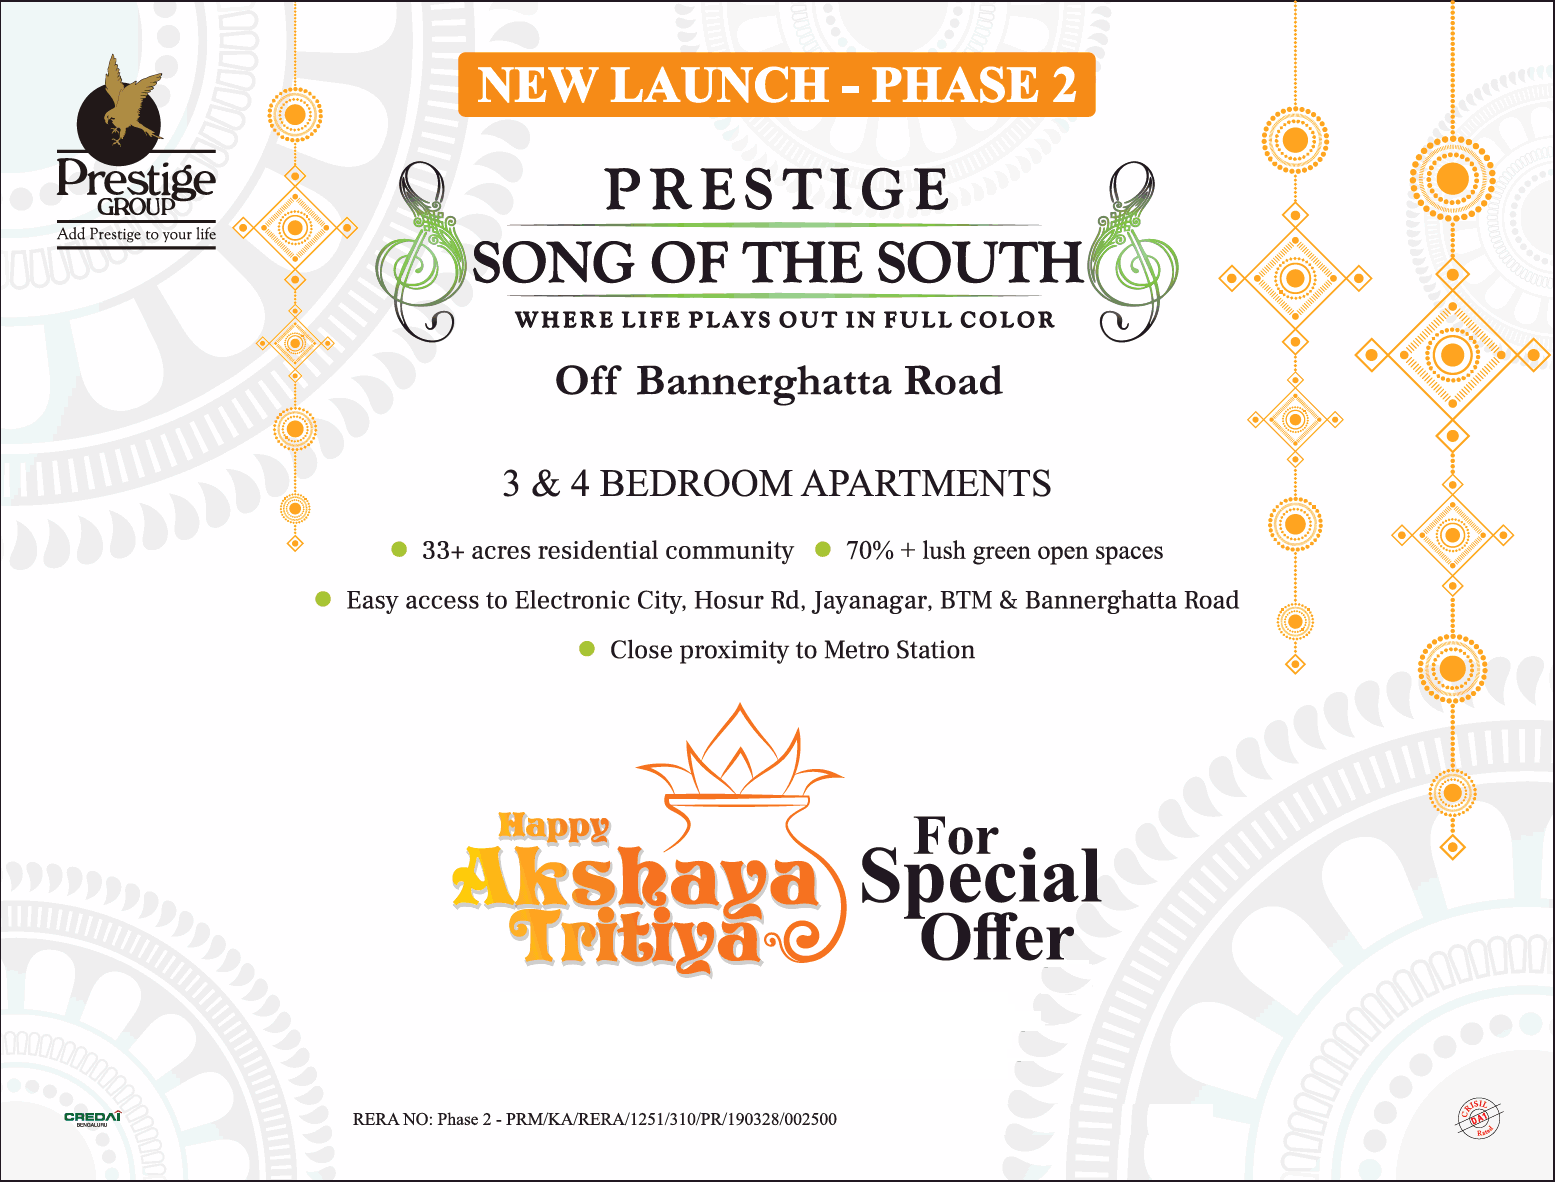 Prestige Song of the South presents 3 & 4 Bedroom Apartments in Bangalore